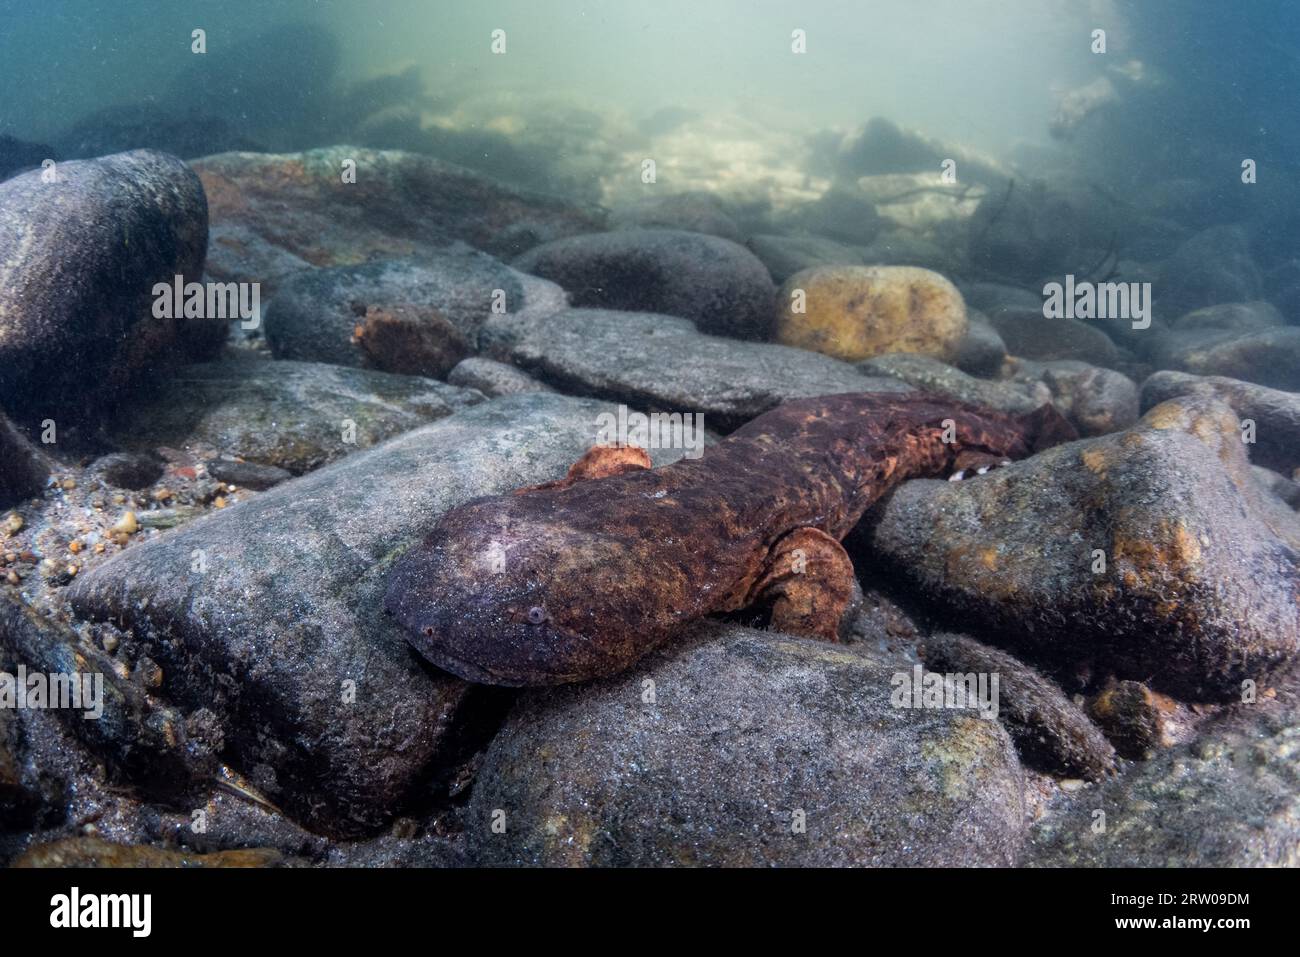 An aquatic hellbender salamander (Cryptobranchus alleganiensis) the largest amphibian in North America, is an species found in pristine freshwater. Stock Photo